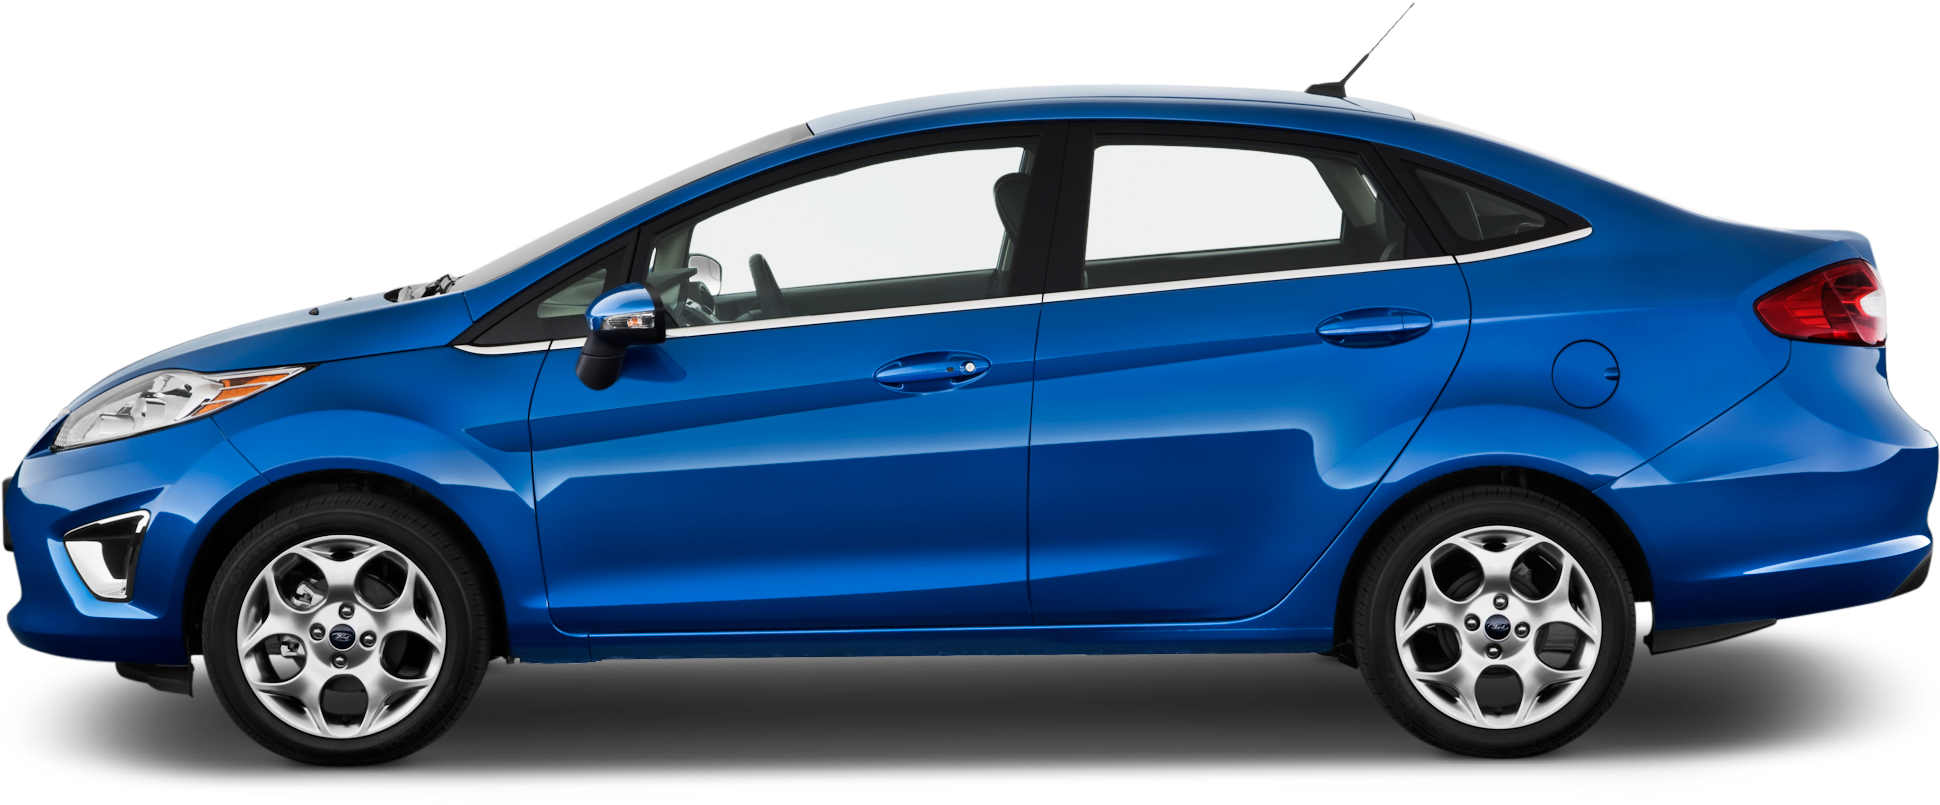 Ford Fiesta Sedan Side View Png Clipart - Ford Car Side View (2048x1360)